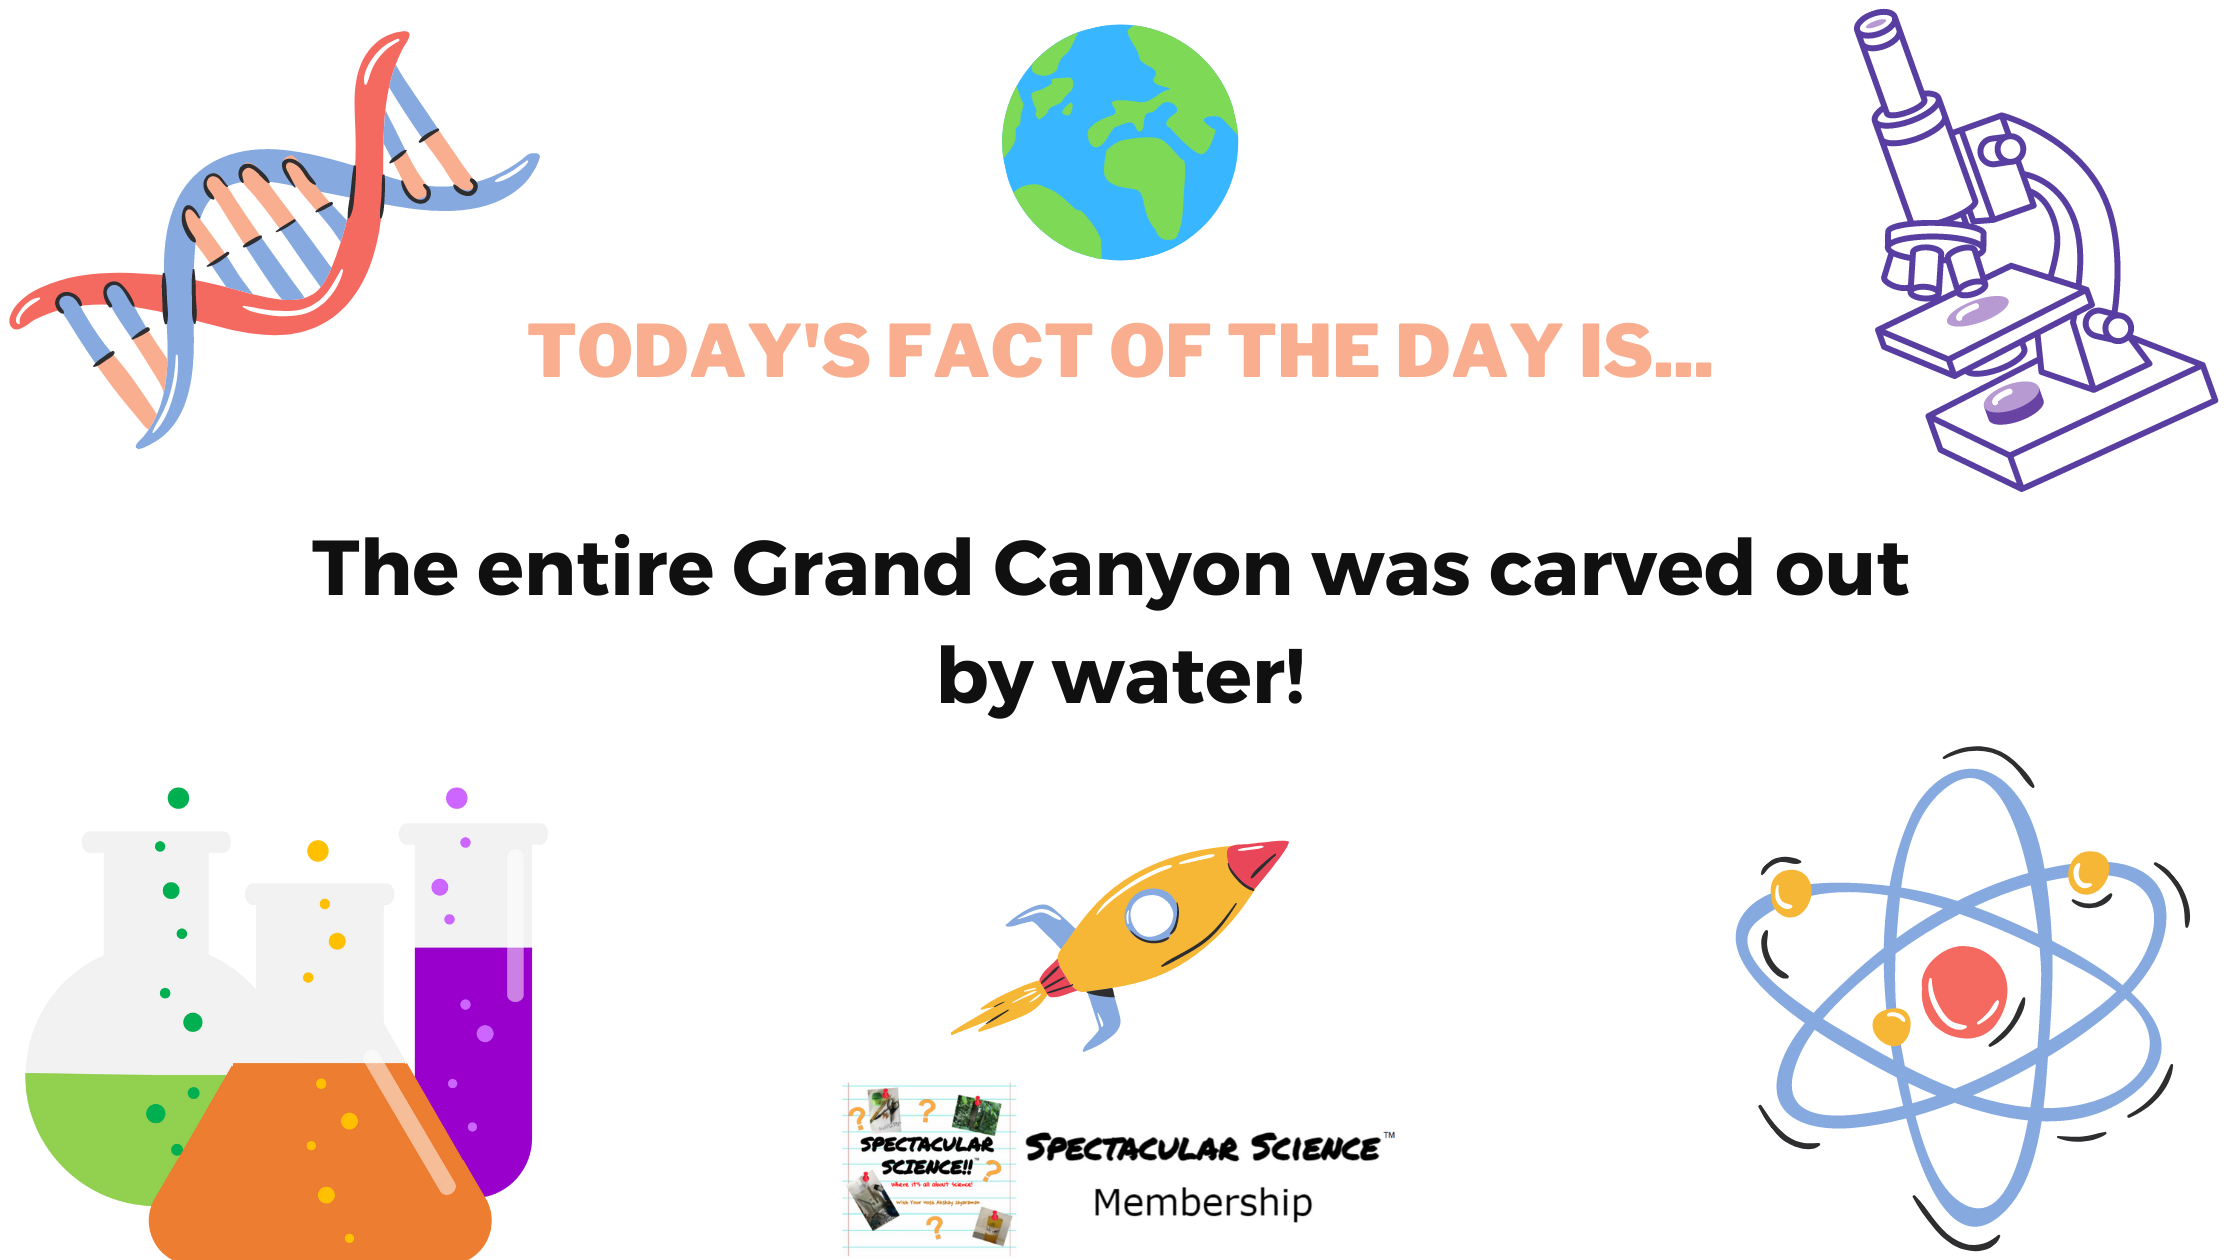 Fact of the Day Image June 23rd